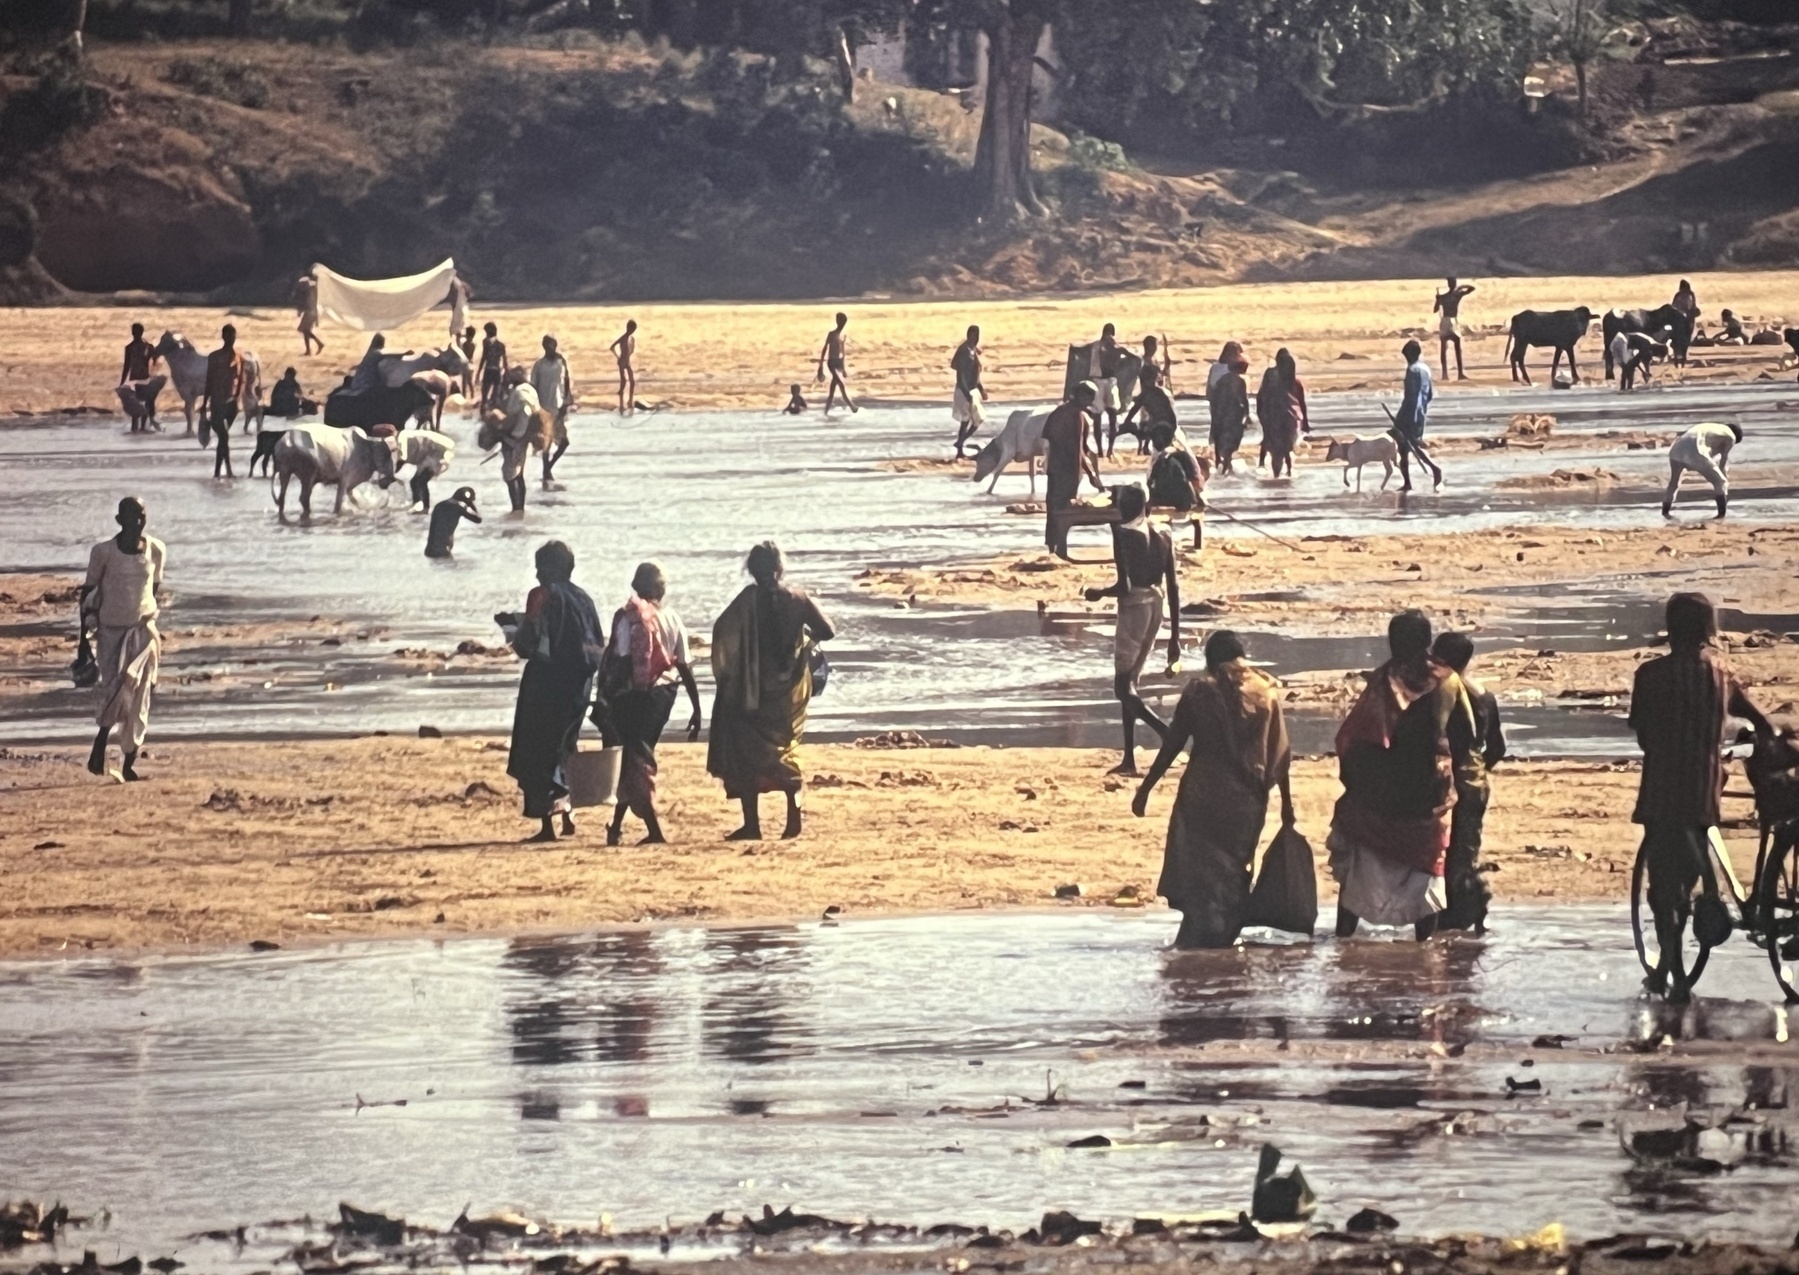 Groups of people, one with a people, and cows in India walking across a dry river bed with a few puddles